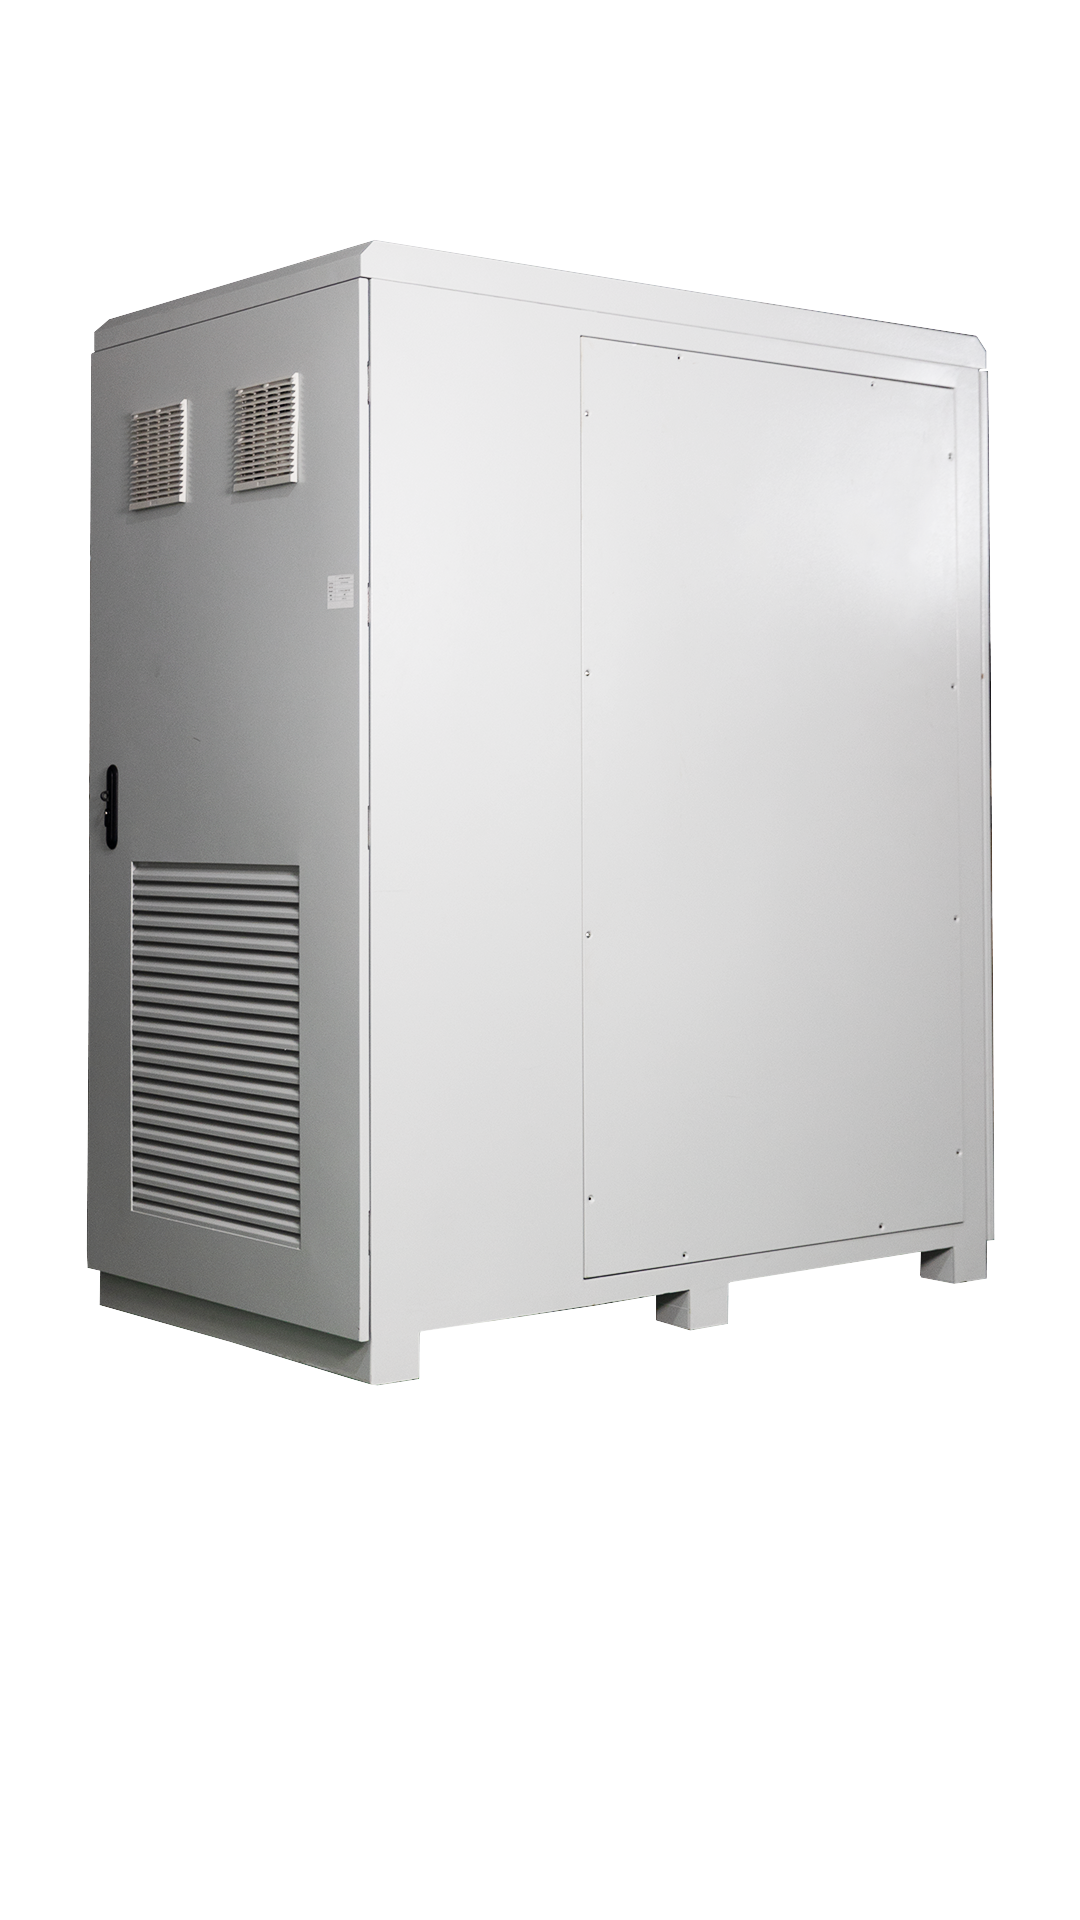 20KW/30KW/50KW/60KW / 53KWH-173KWH Outdoor Cabinet Energy Storage System